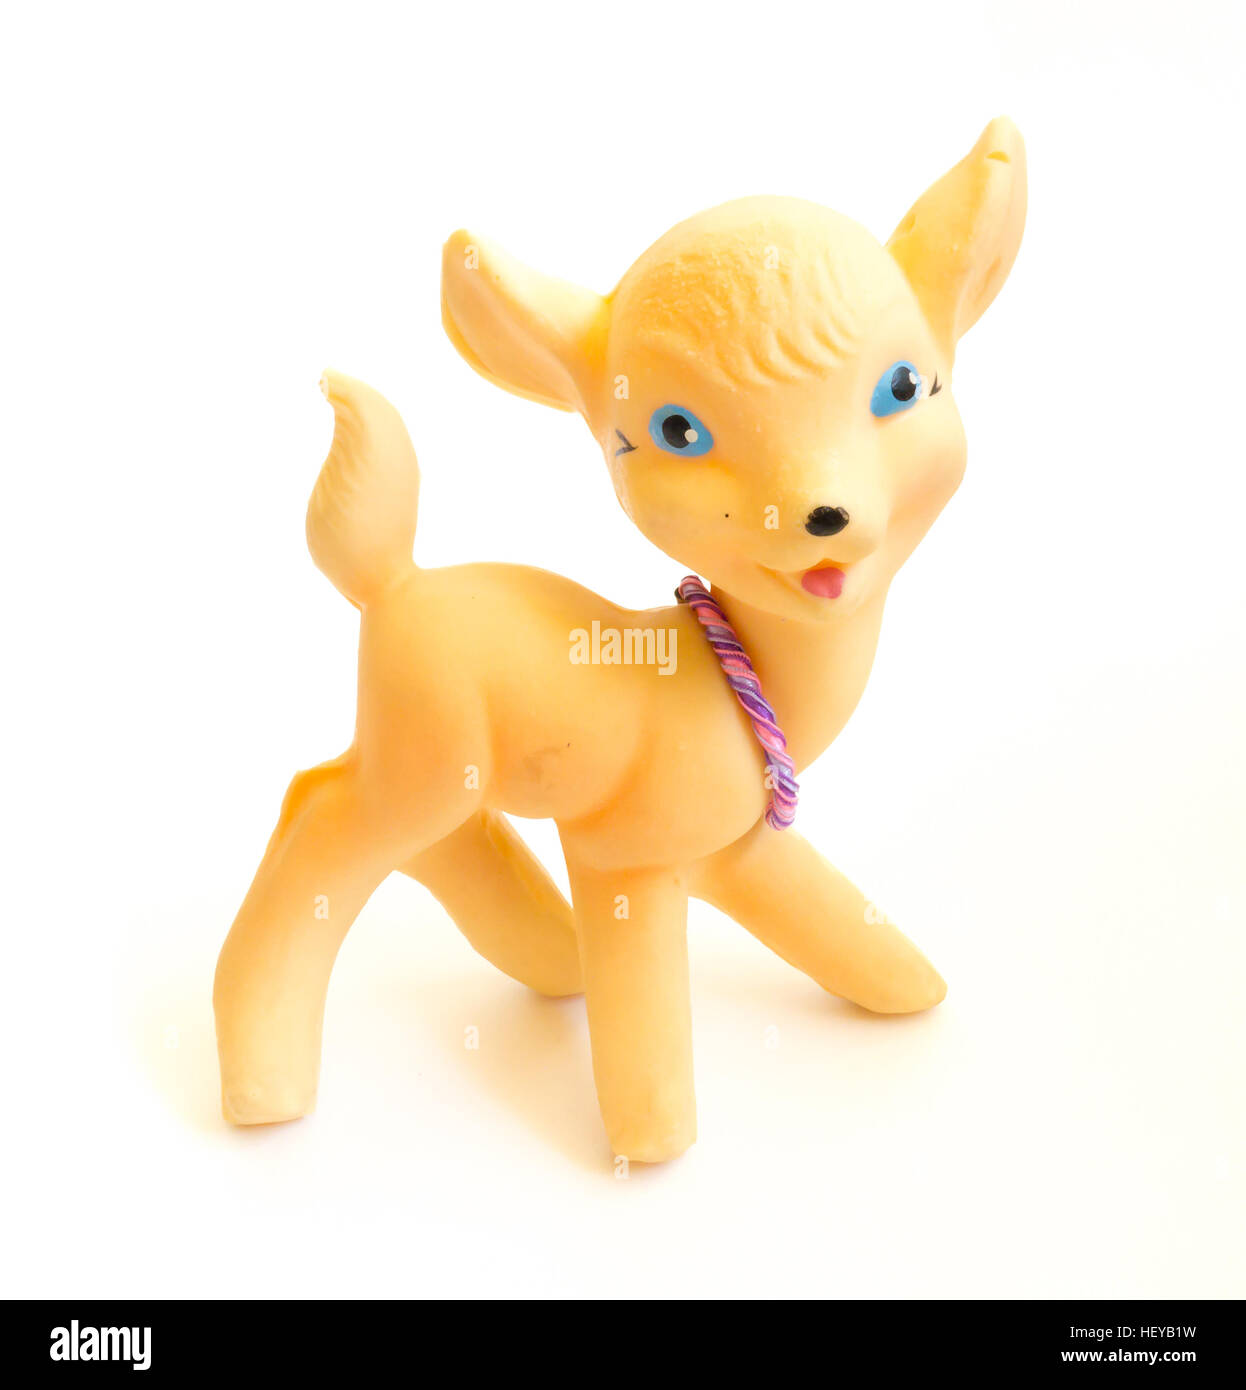 The Miniature yellow toy fawn. Stock Photo